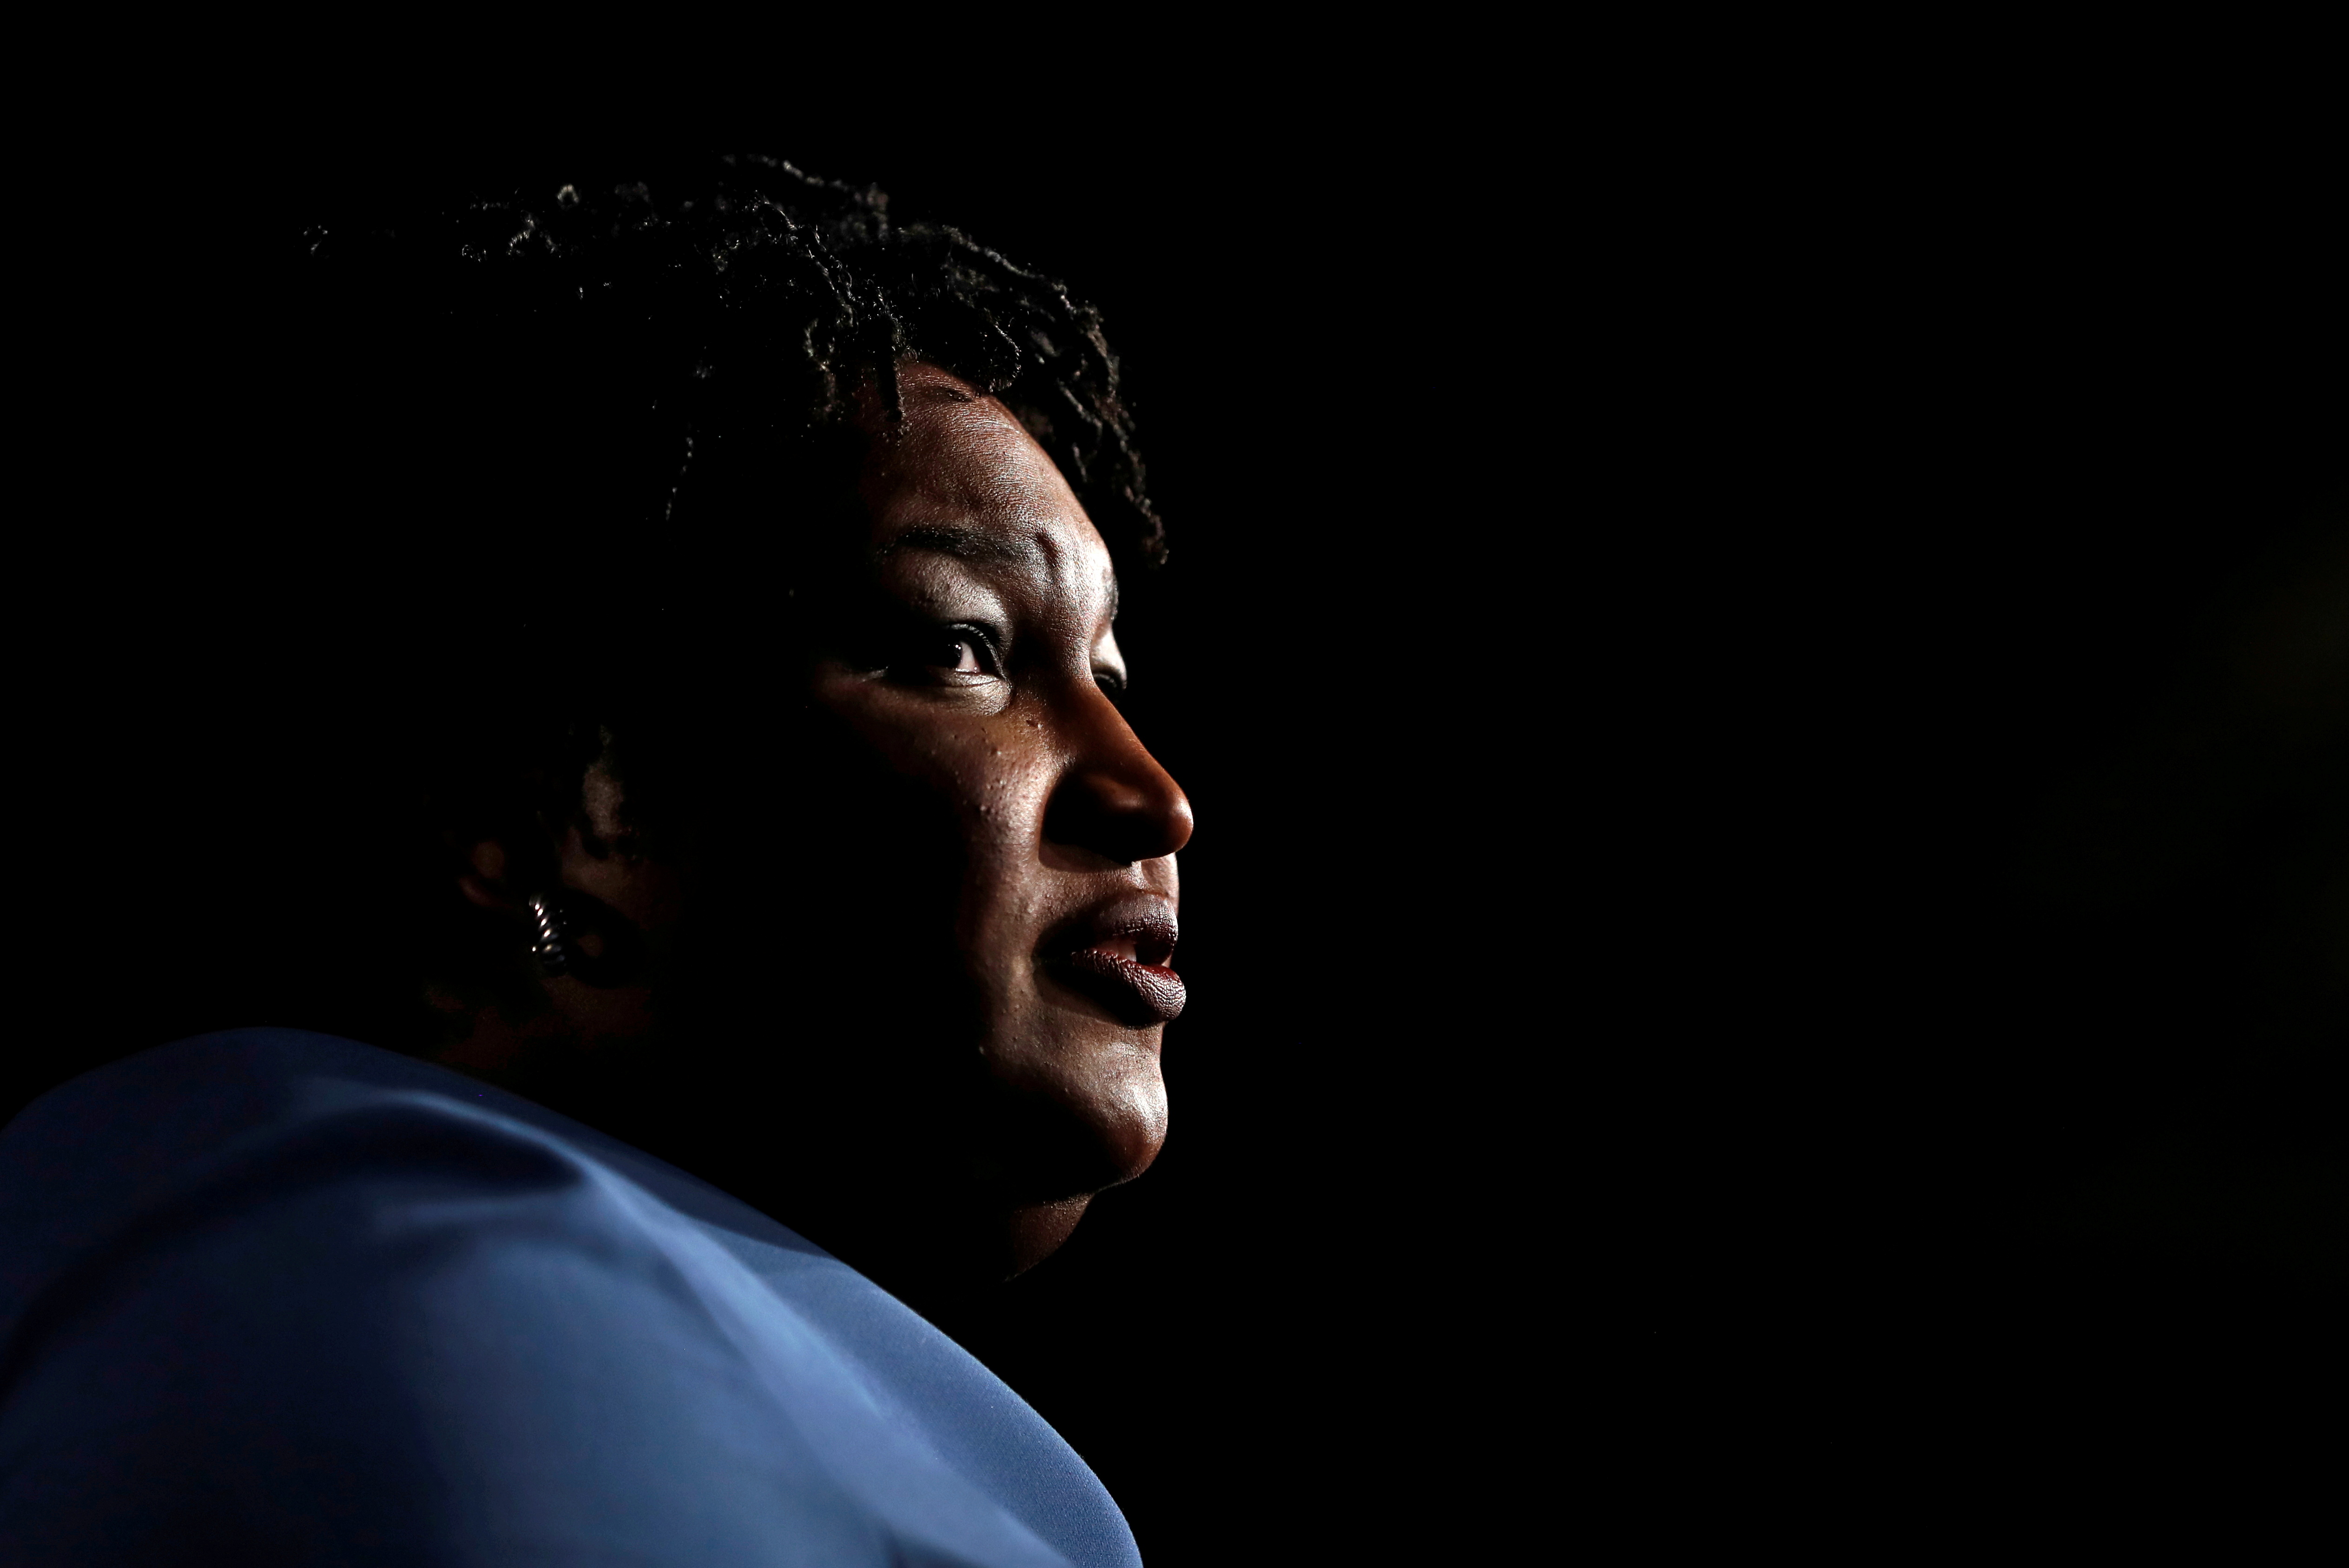 Georgia Democratic gubernatorial nominee Stacey Abrams speaks to supporters during a midterm election night party in Atlanta, Georgia, U.S., November 7, 2018. REUTERS/Leah Millis/File Photo